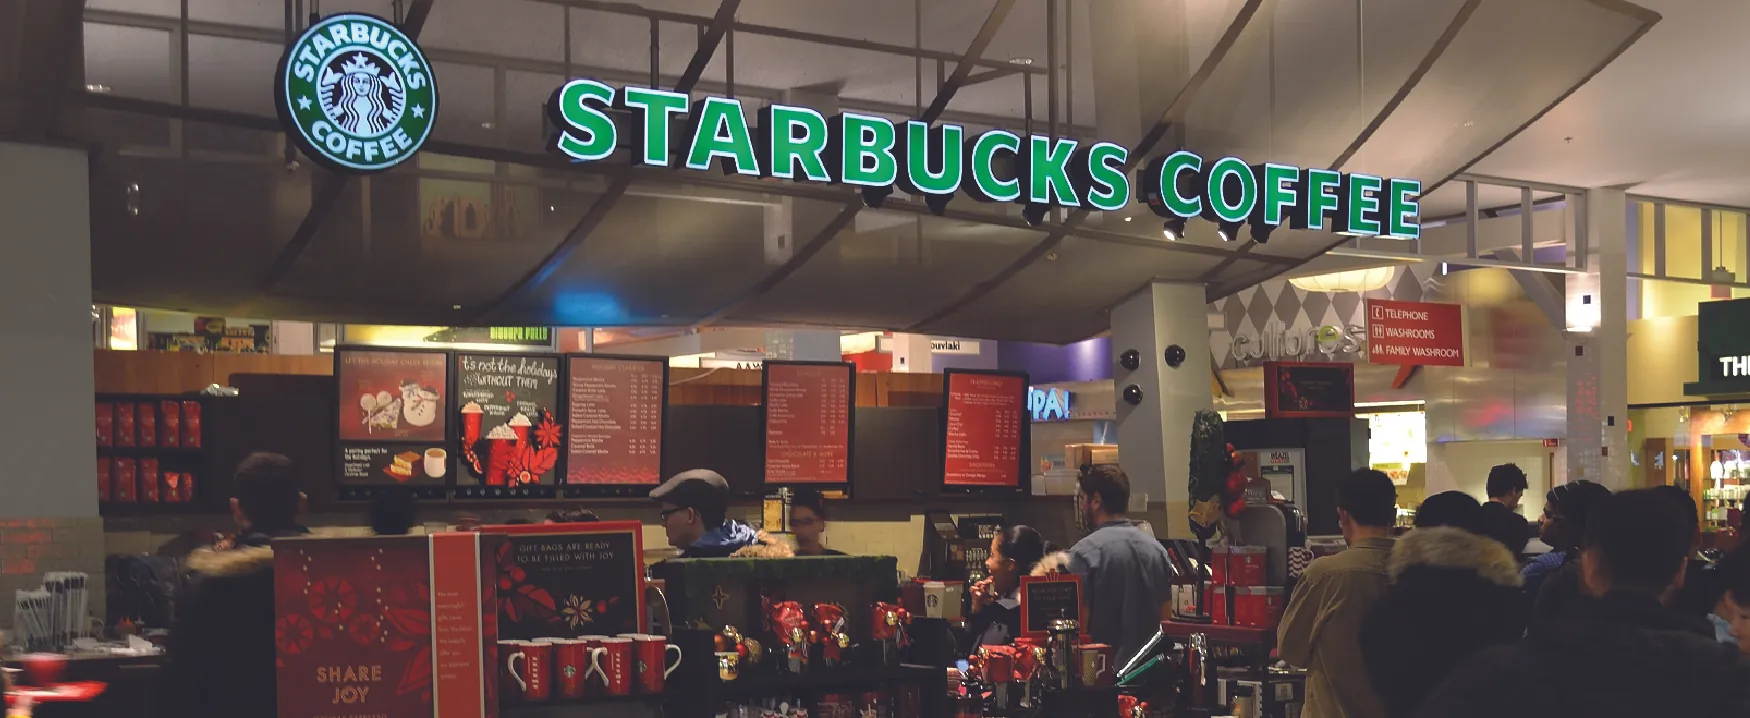 This image shows the inside of a Starbucks Coffee store.